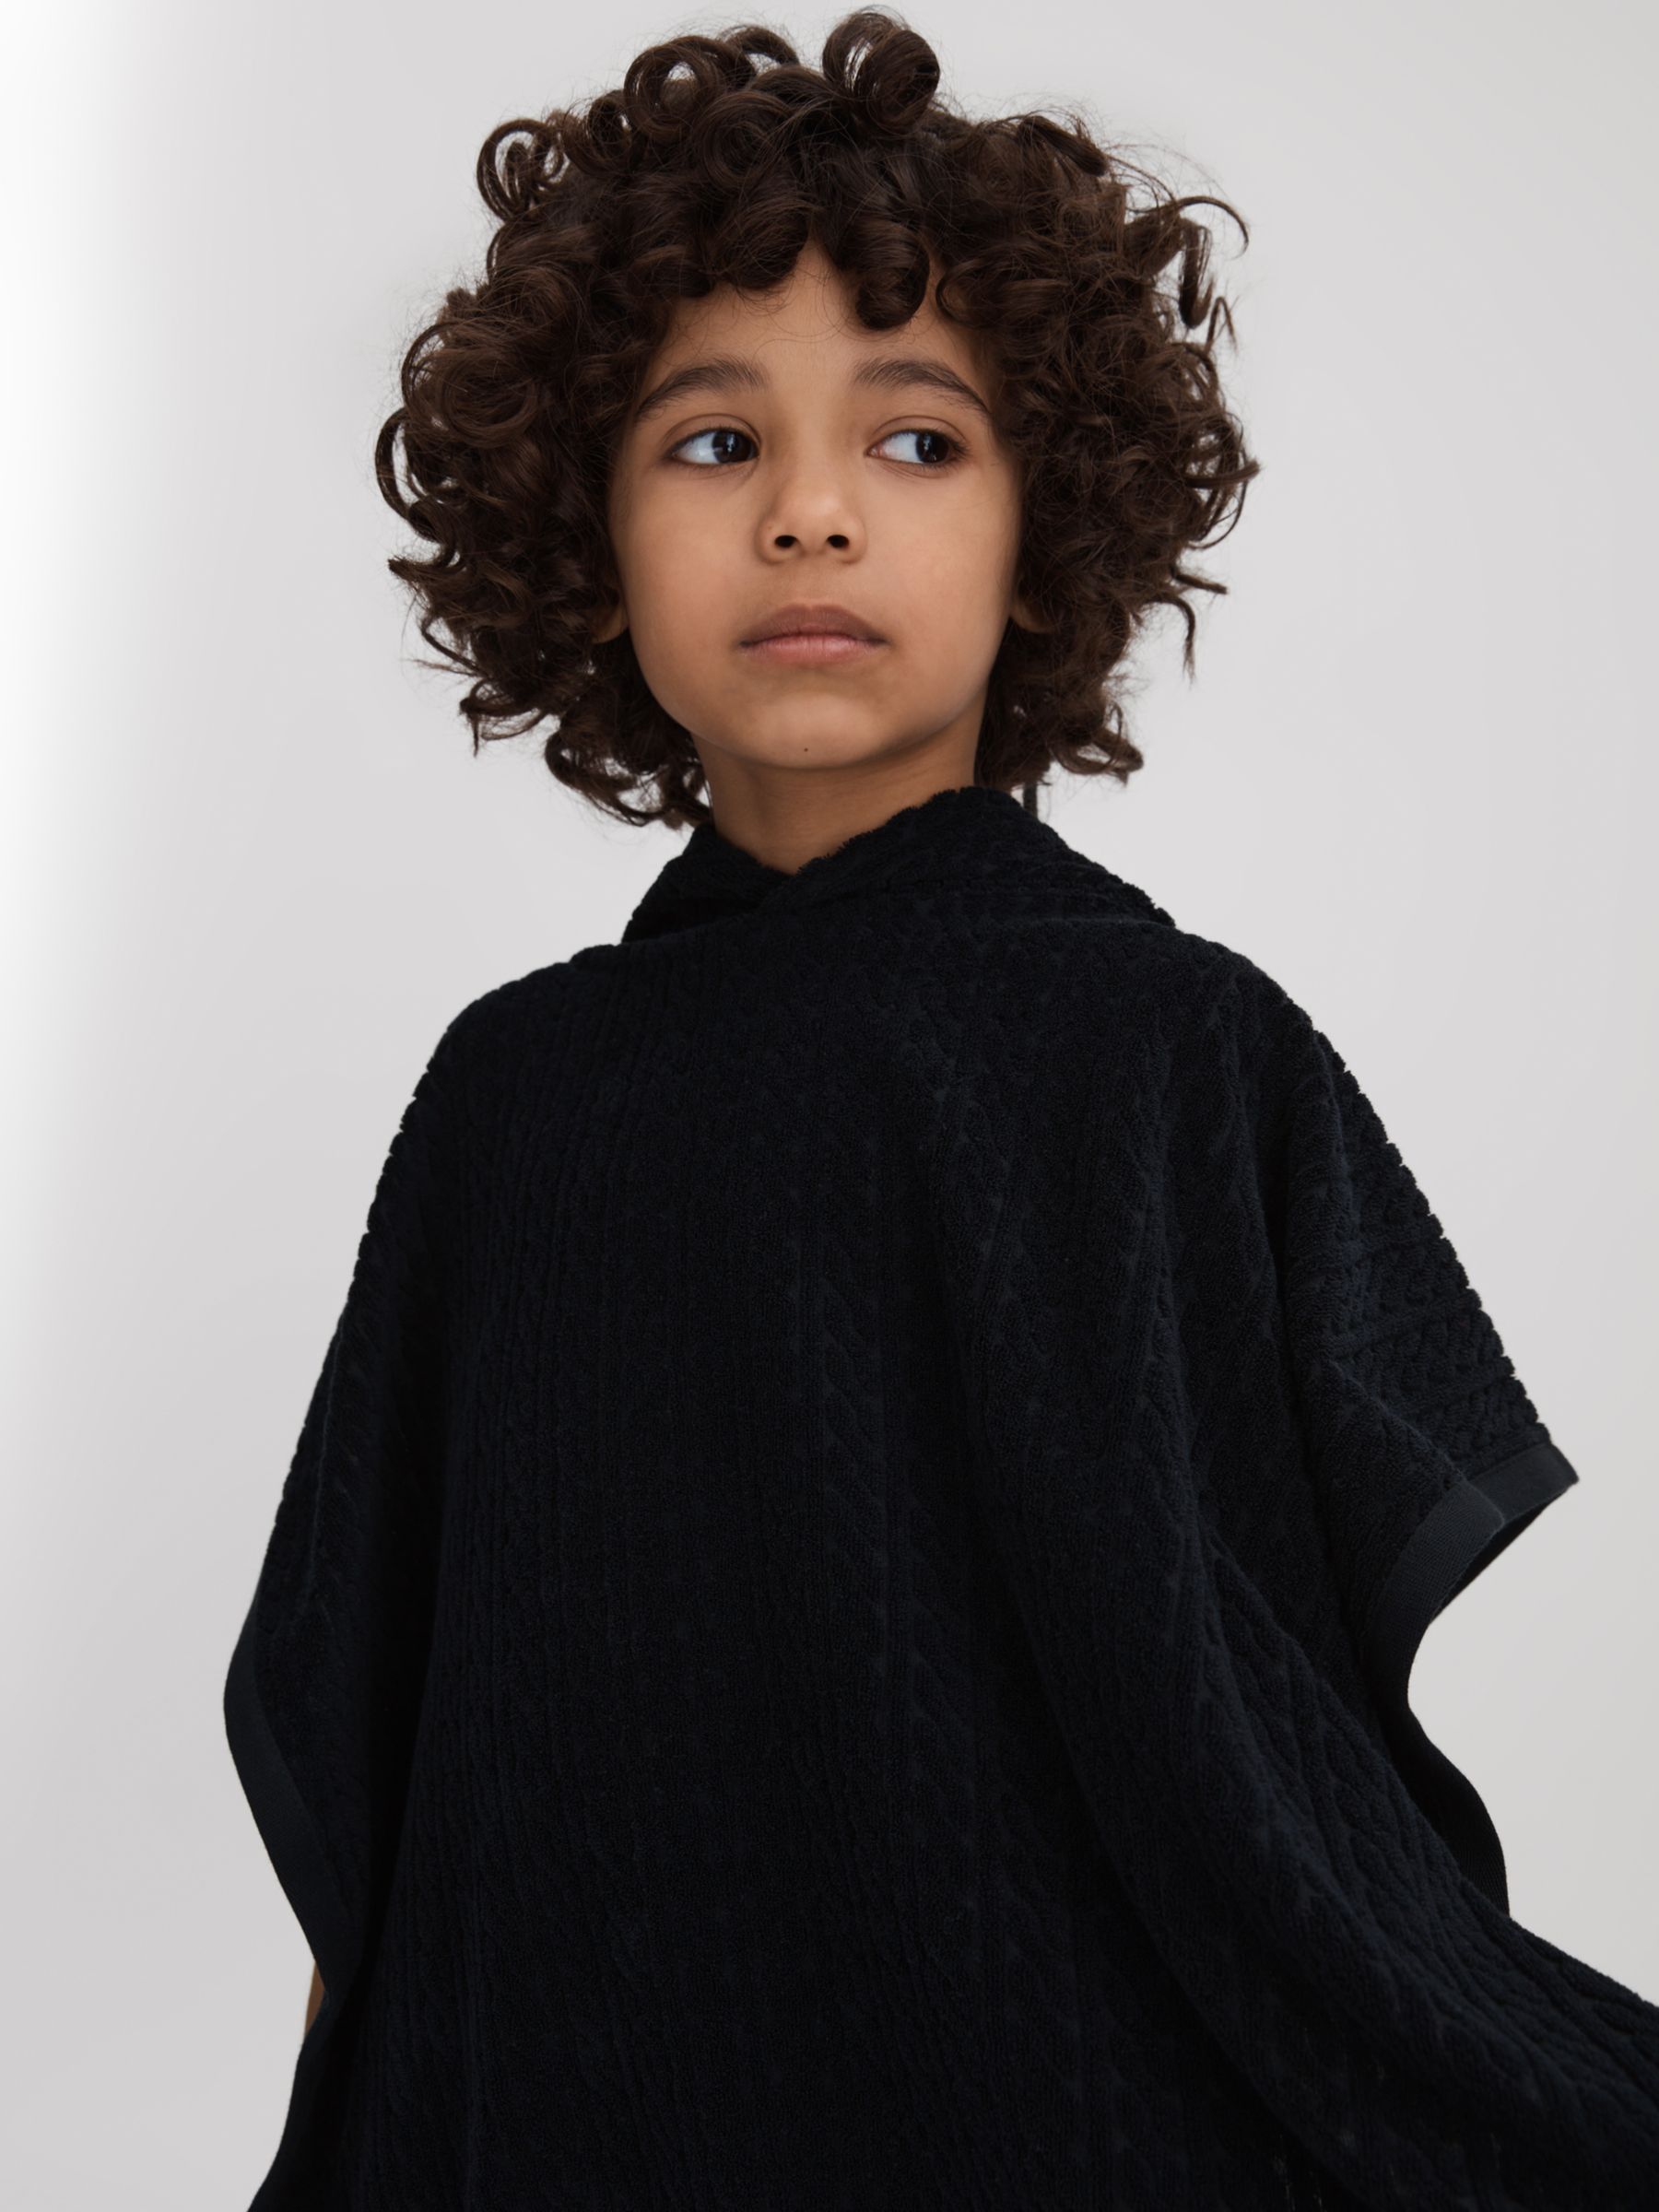 Reiss Kids' Shine Textured Towelling Hooded Poncho, Navy, 3-4 years